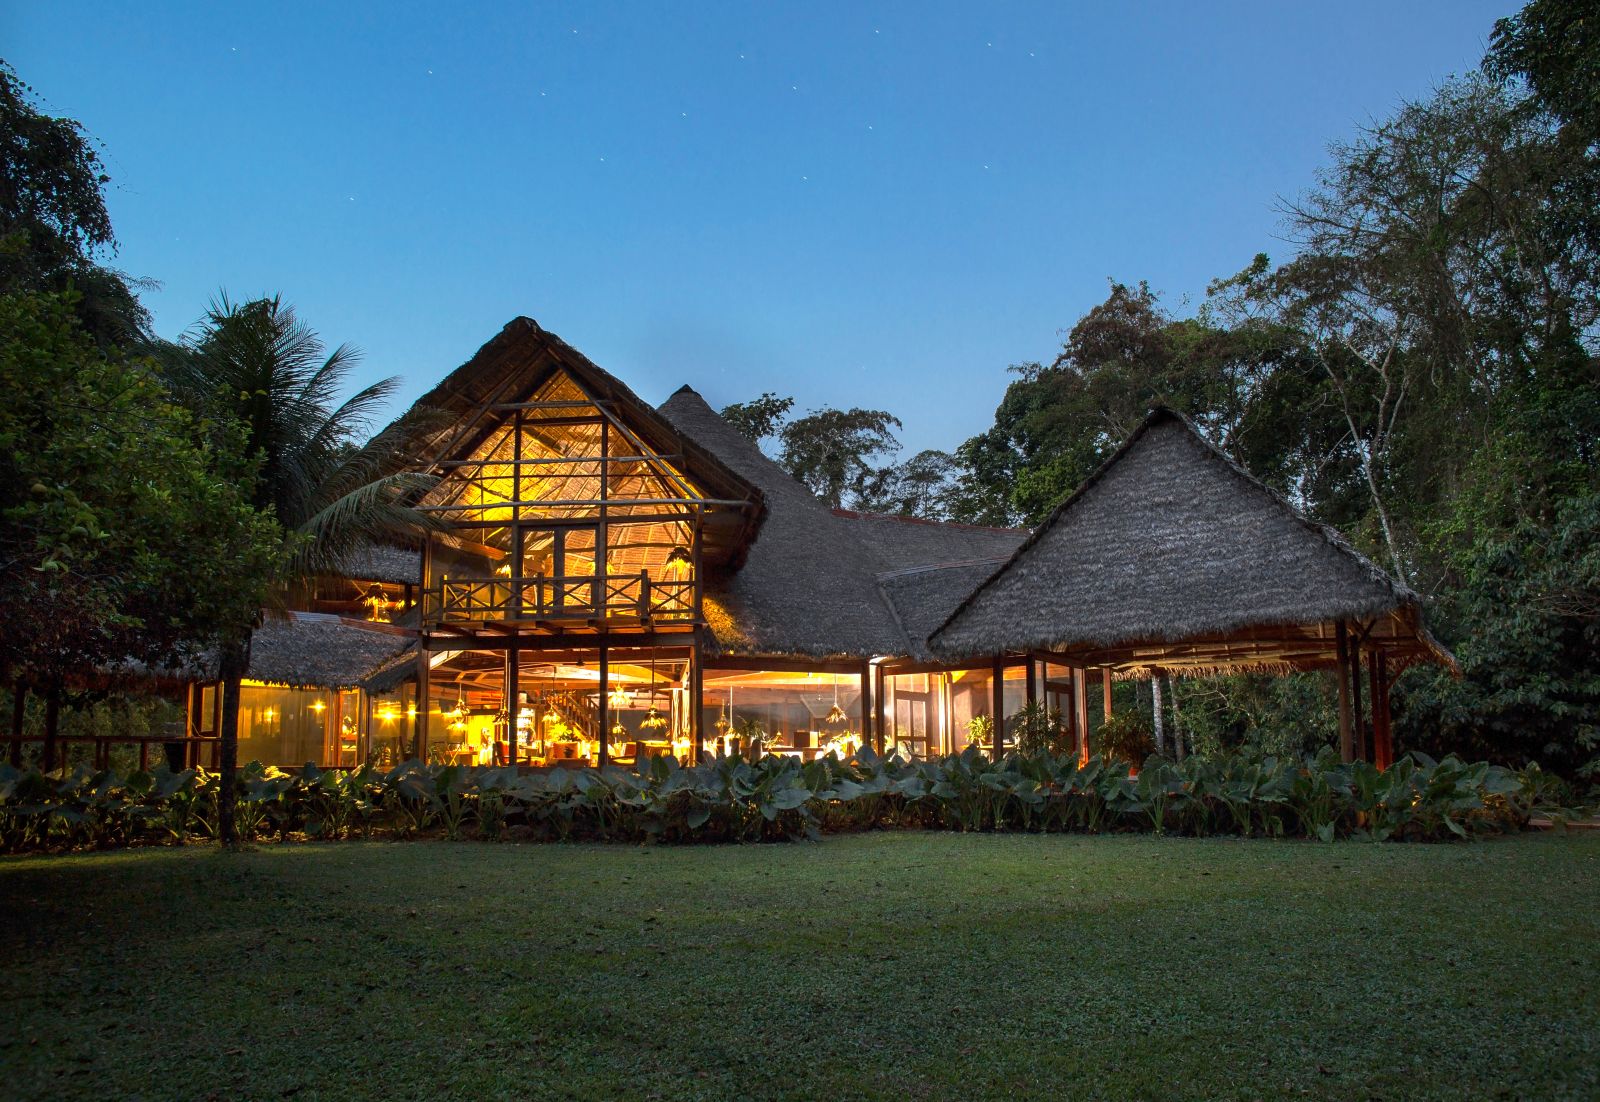 Exterior view of the main lodge building at Inkaterra Reserva Amazonica in Peru